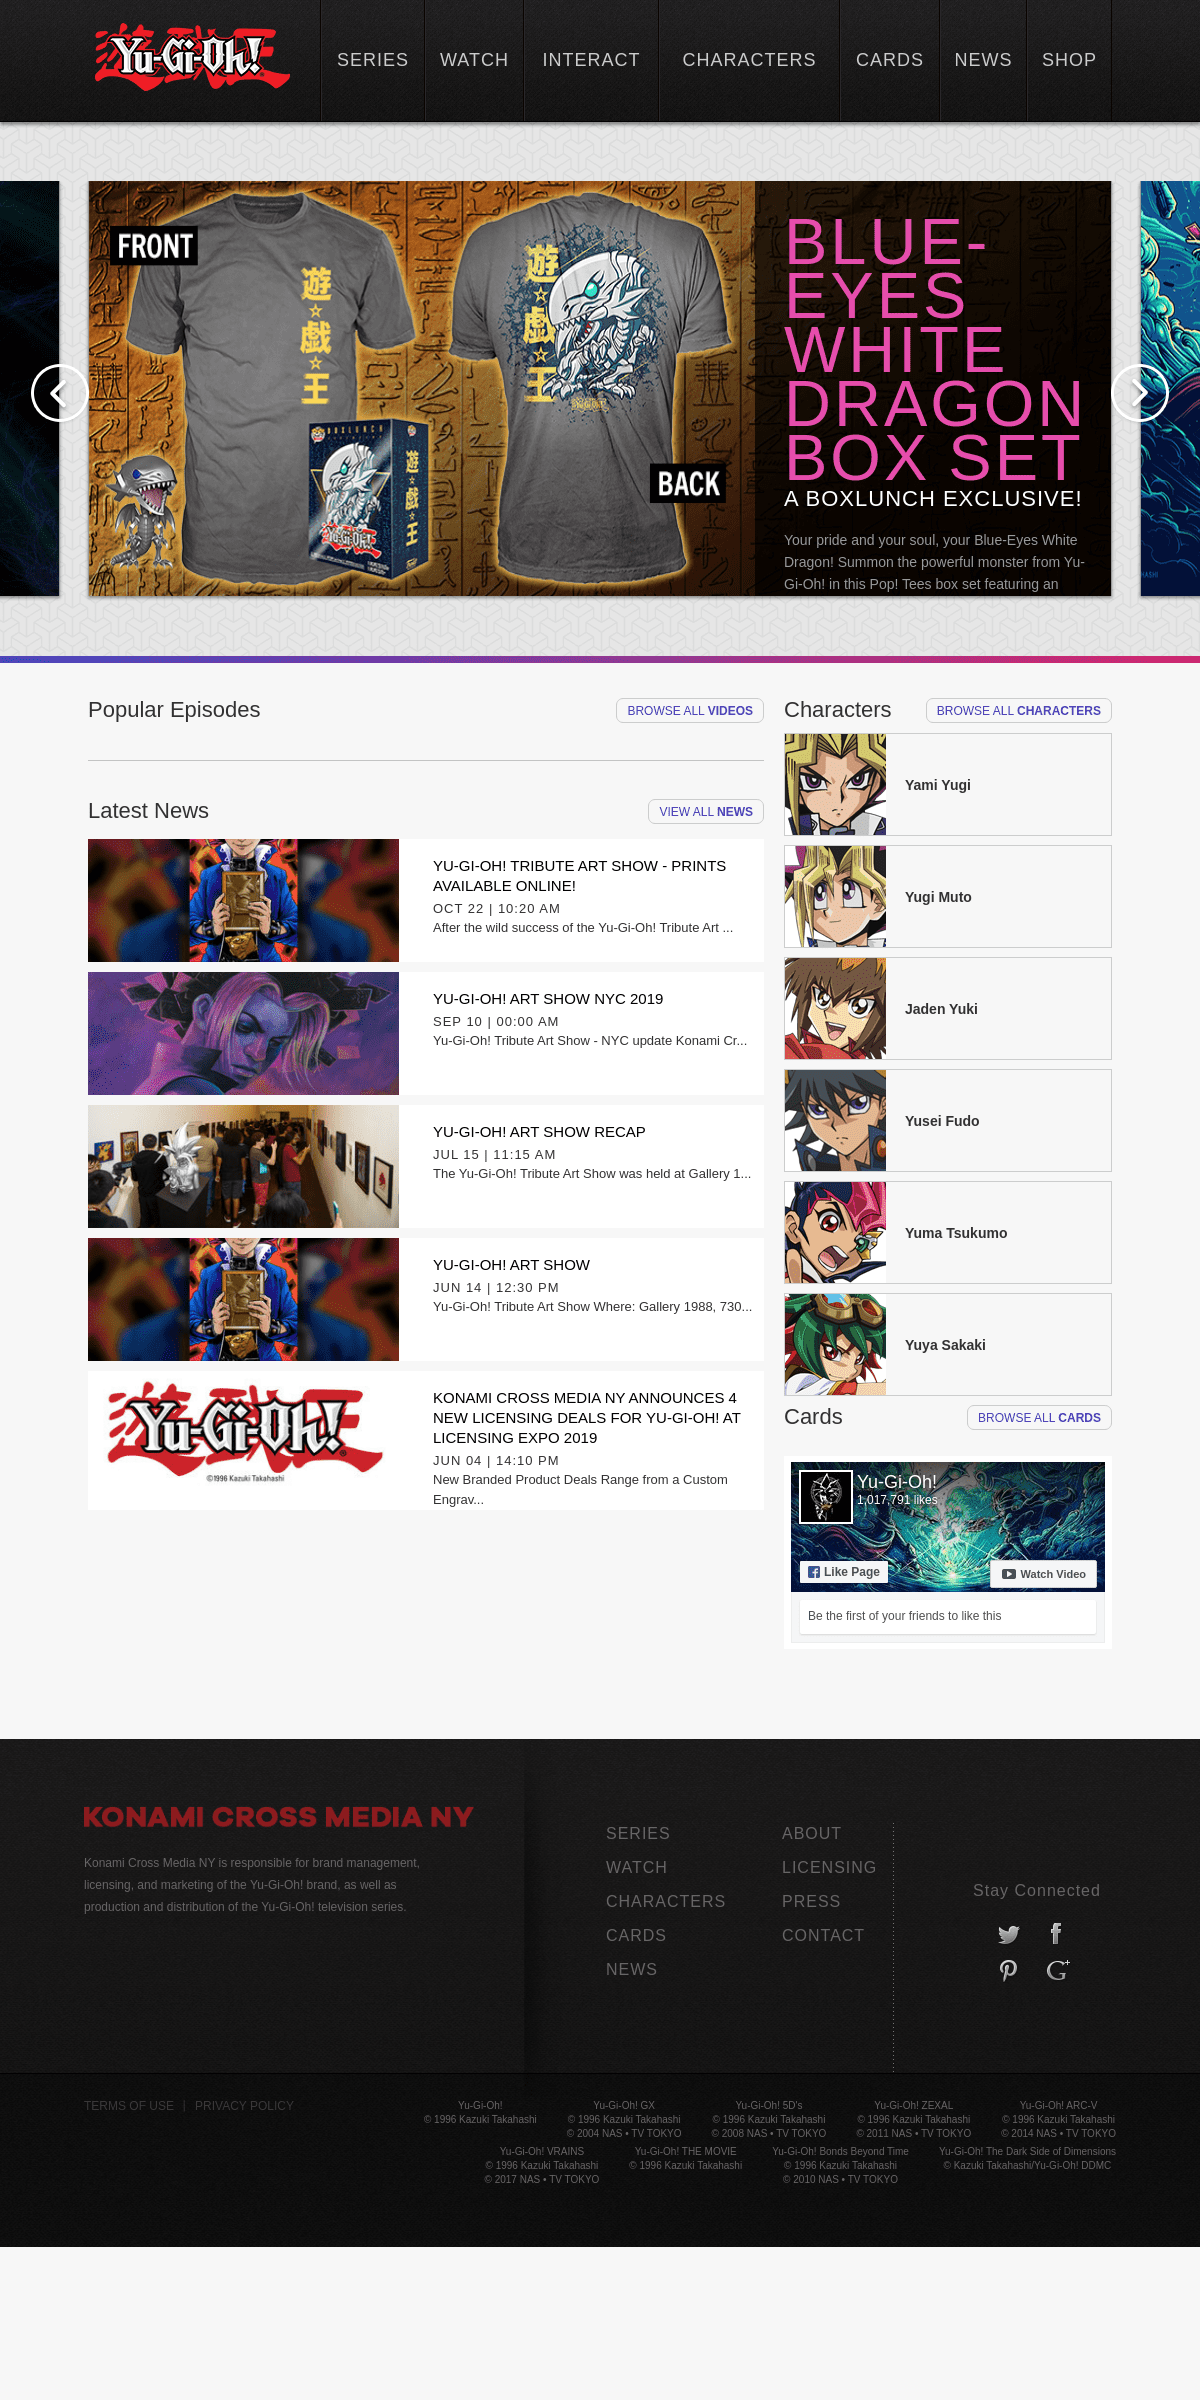 A complete backup of yugioh.com